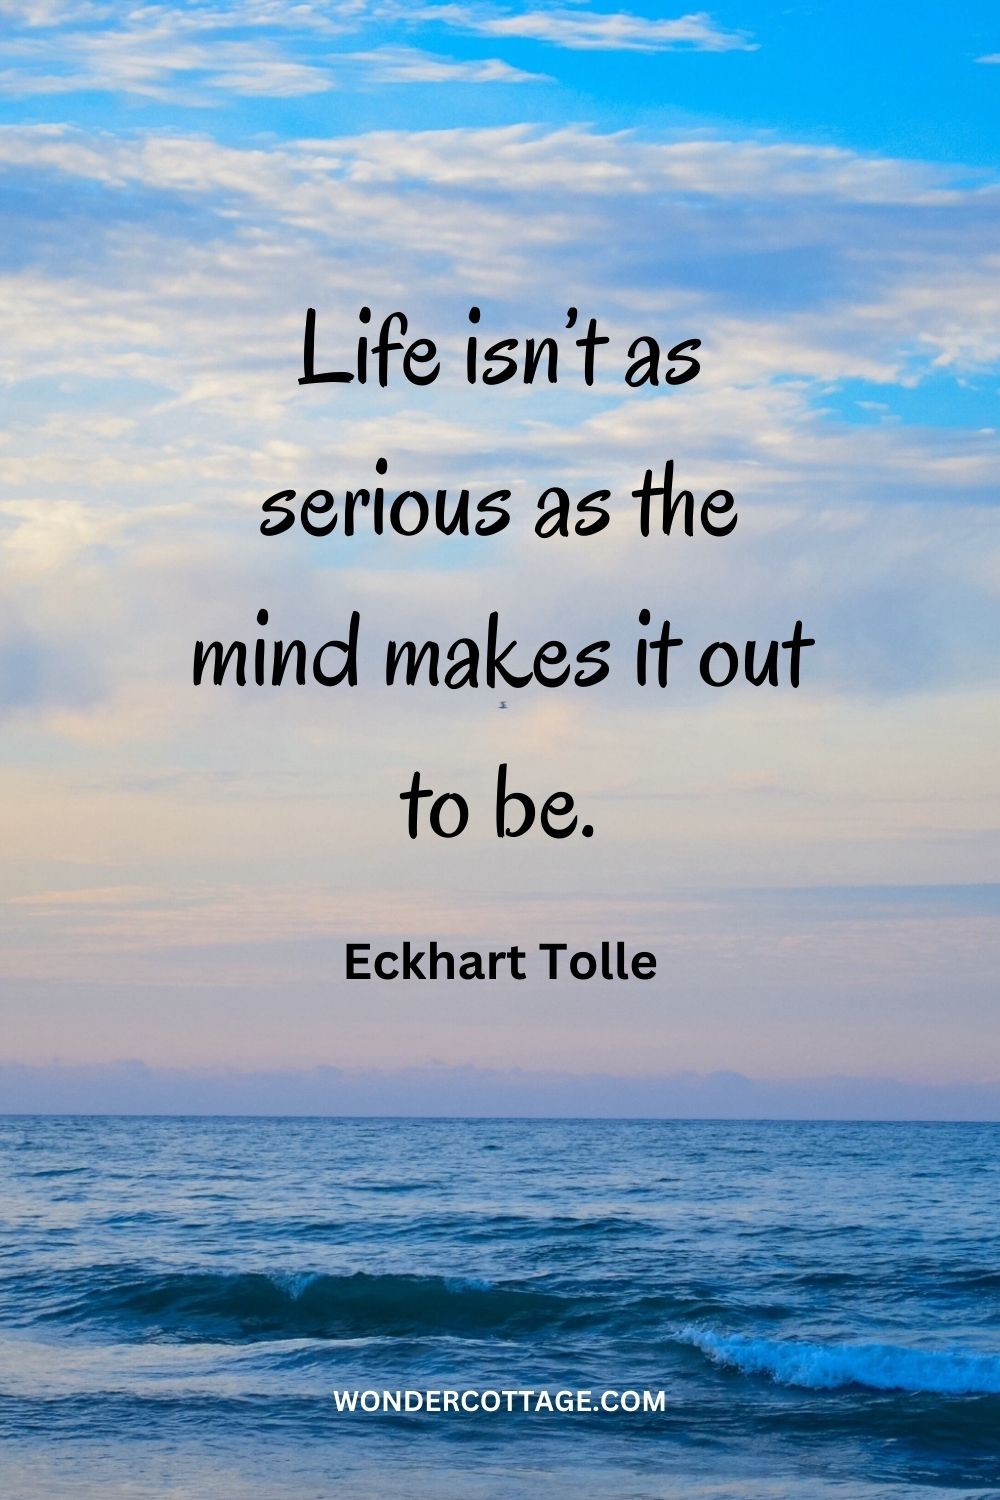 Life isn’t as serious as the mind makes it out to be. Eckhart Tolle